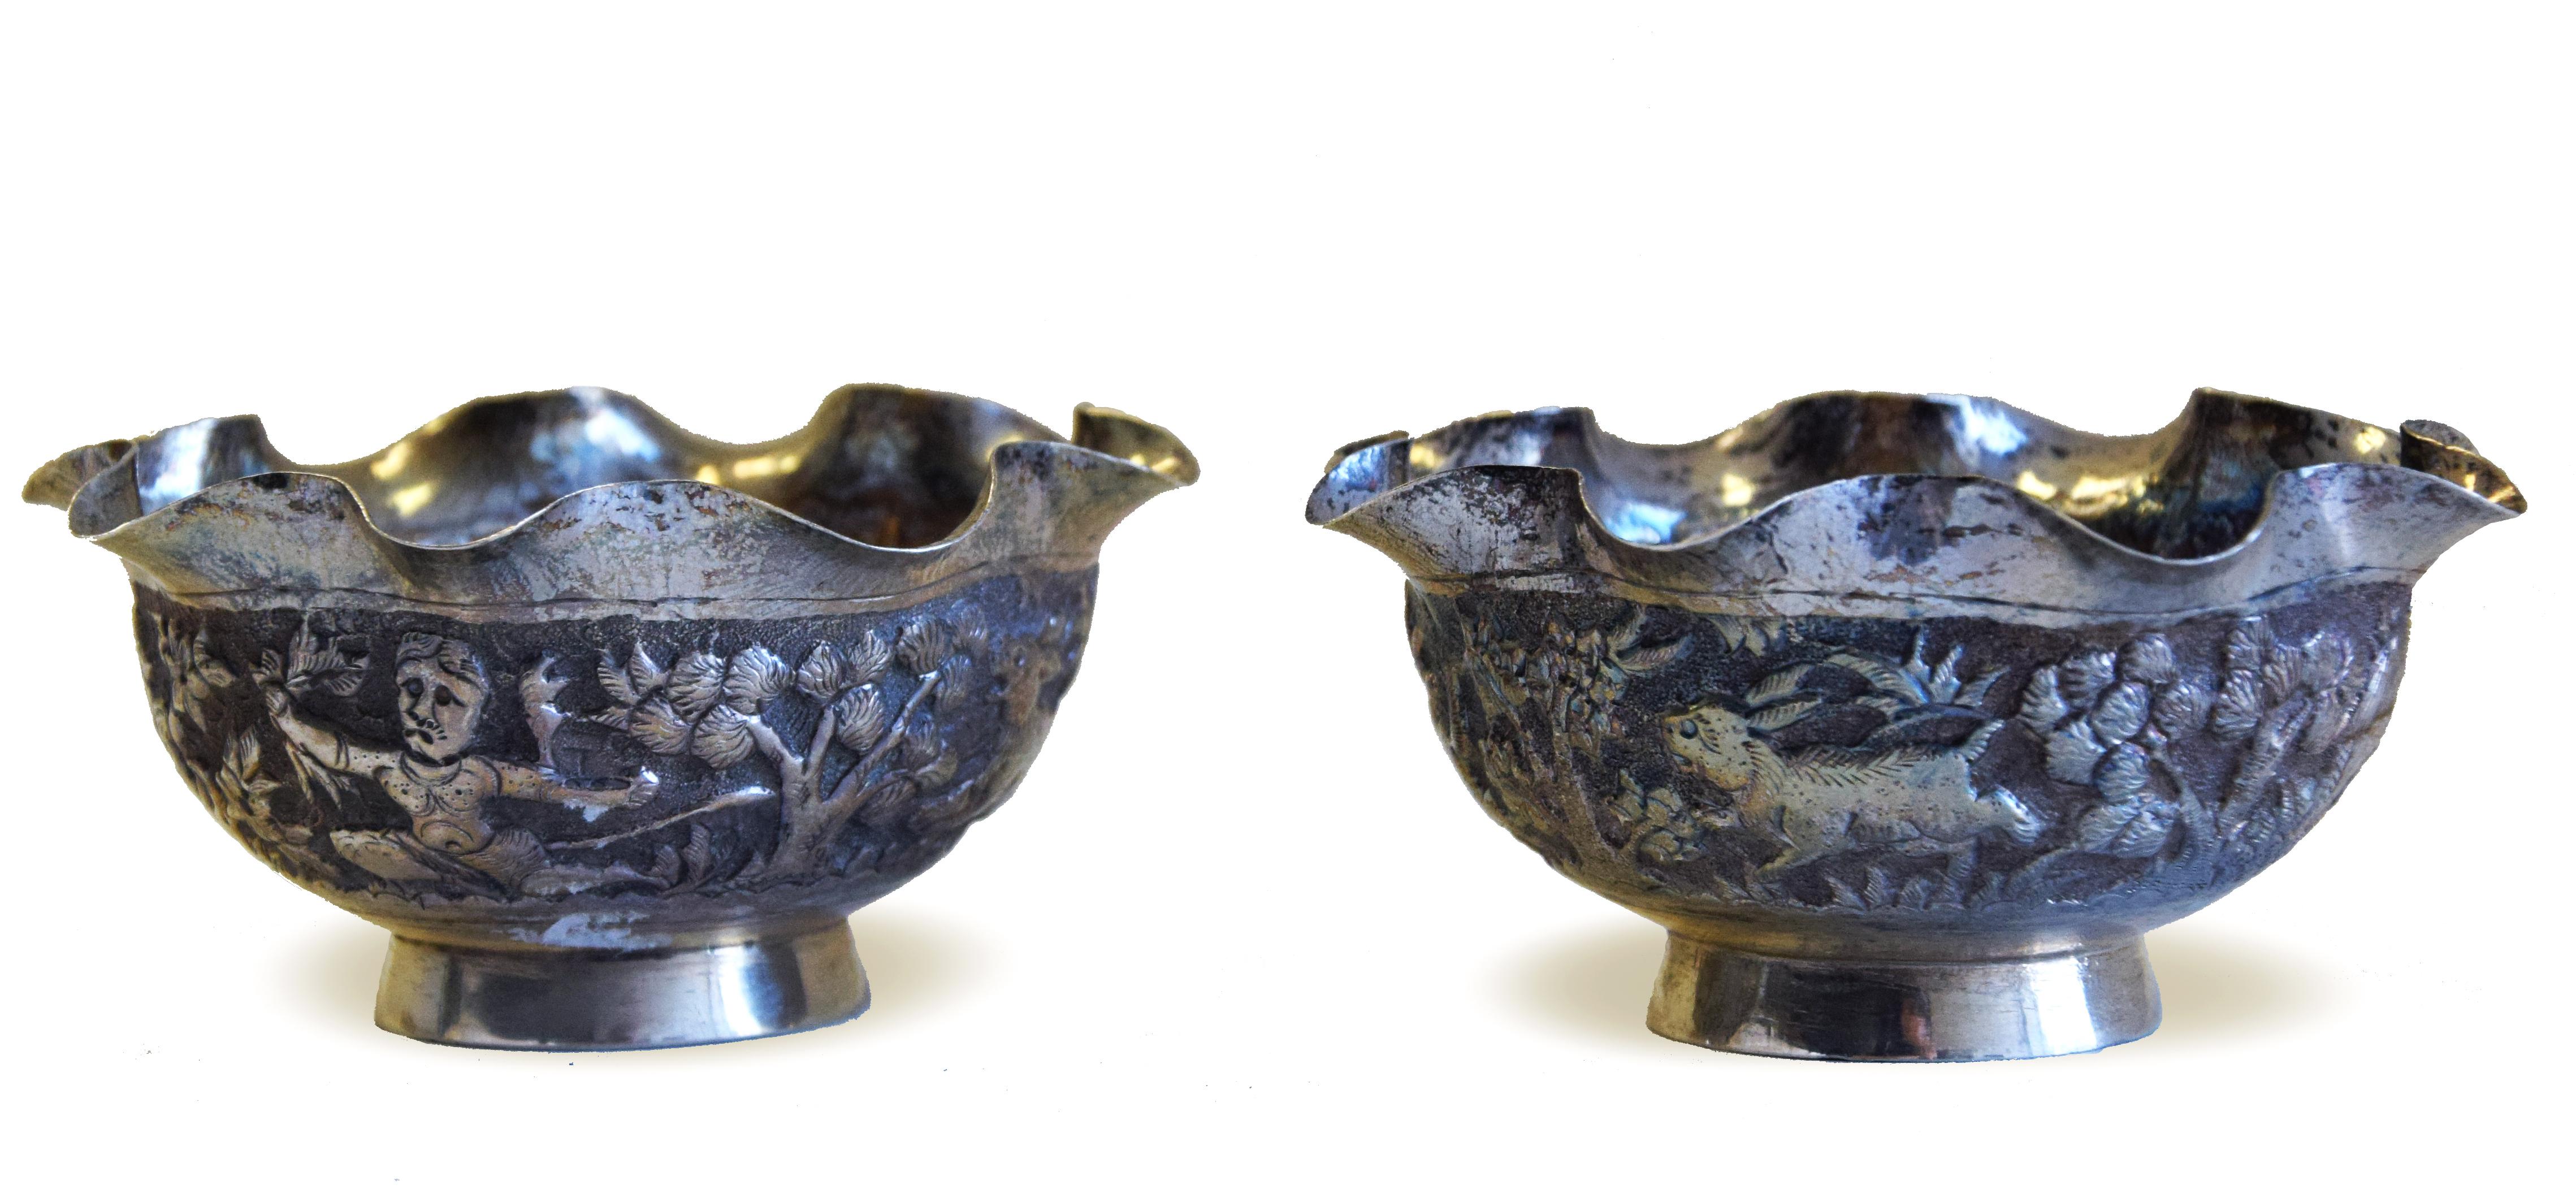 Two small silver bowls are two original decorative objects realized in China in the first half of the 20th century.

Original silver.

Excellent conditions.

Wonderful decorative pair of silver bowls. The two manufacts present a kerchief body,